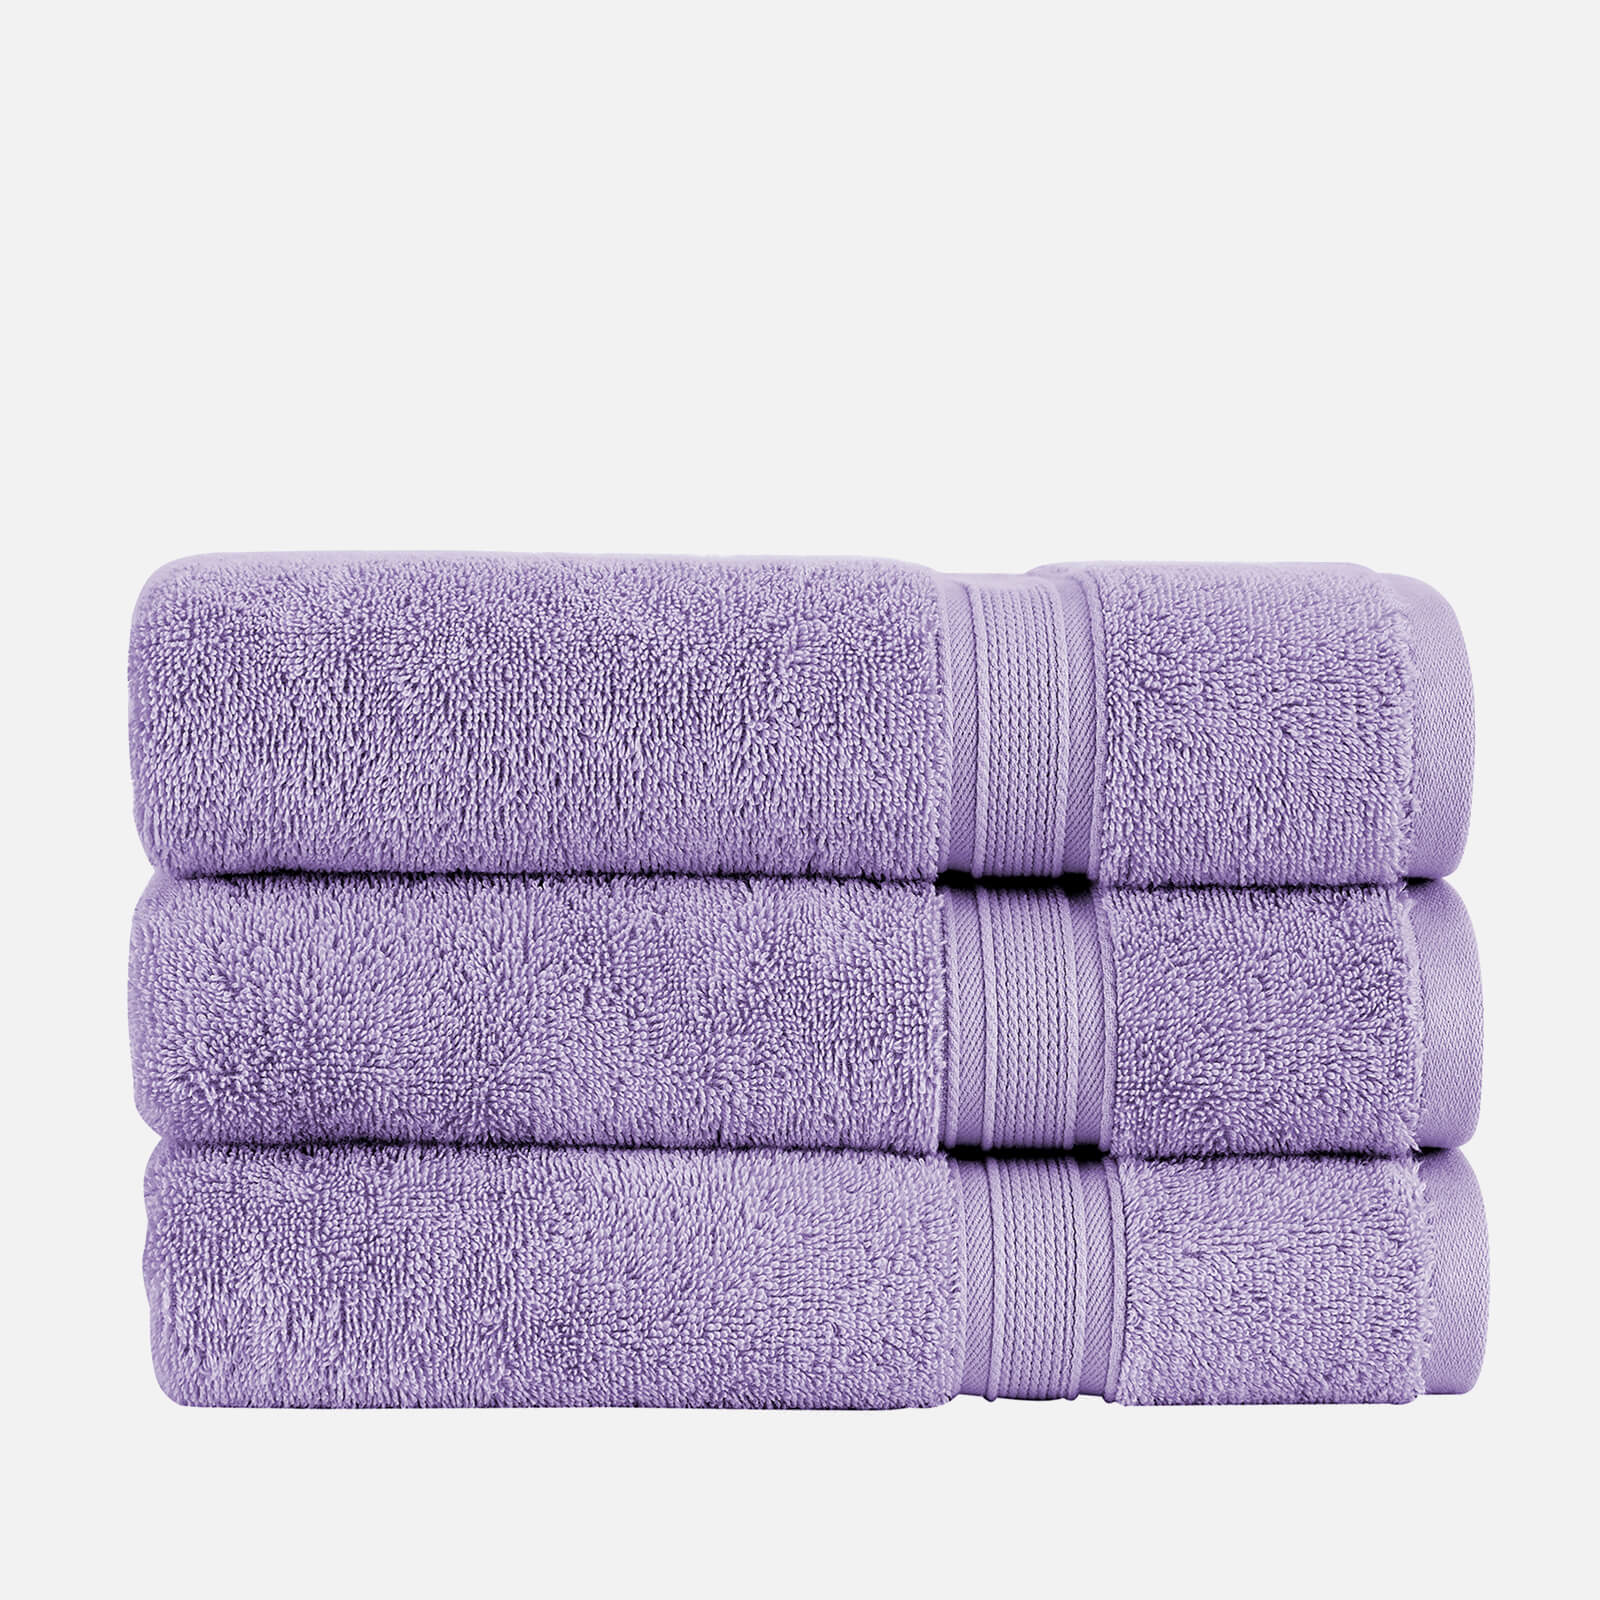 Christy Refresh Towel - Lilac - Set of 2